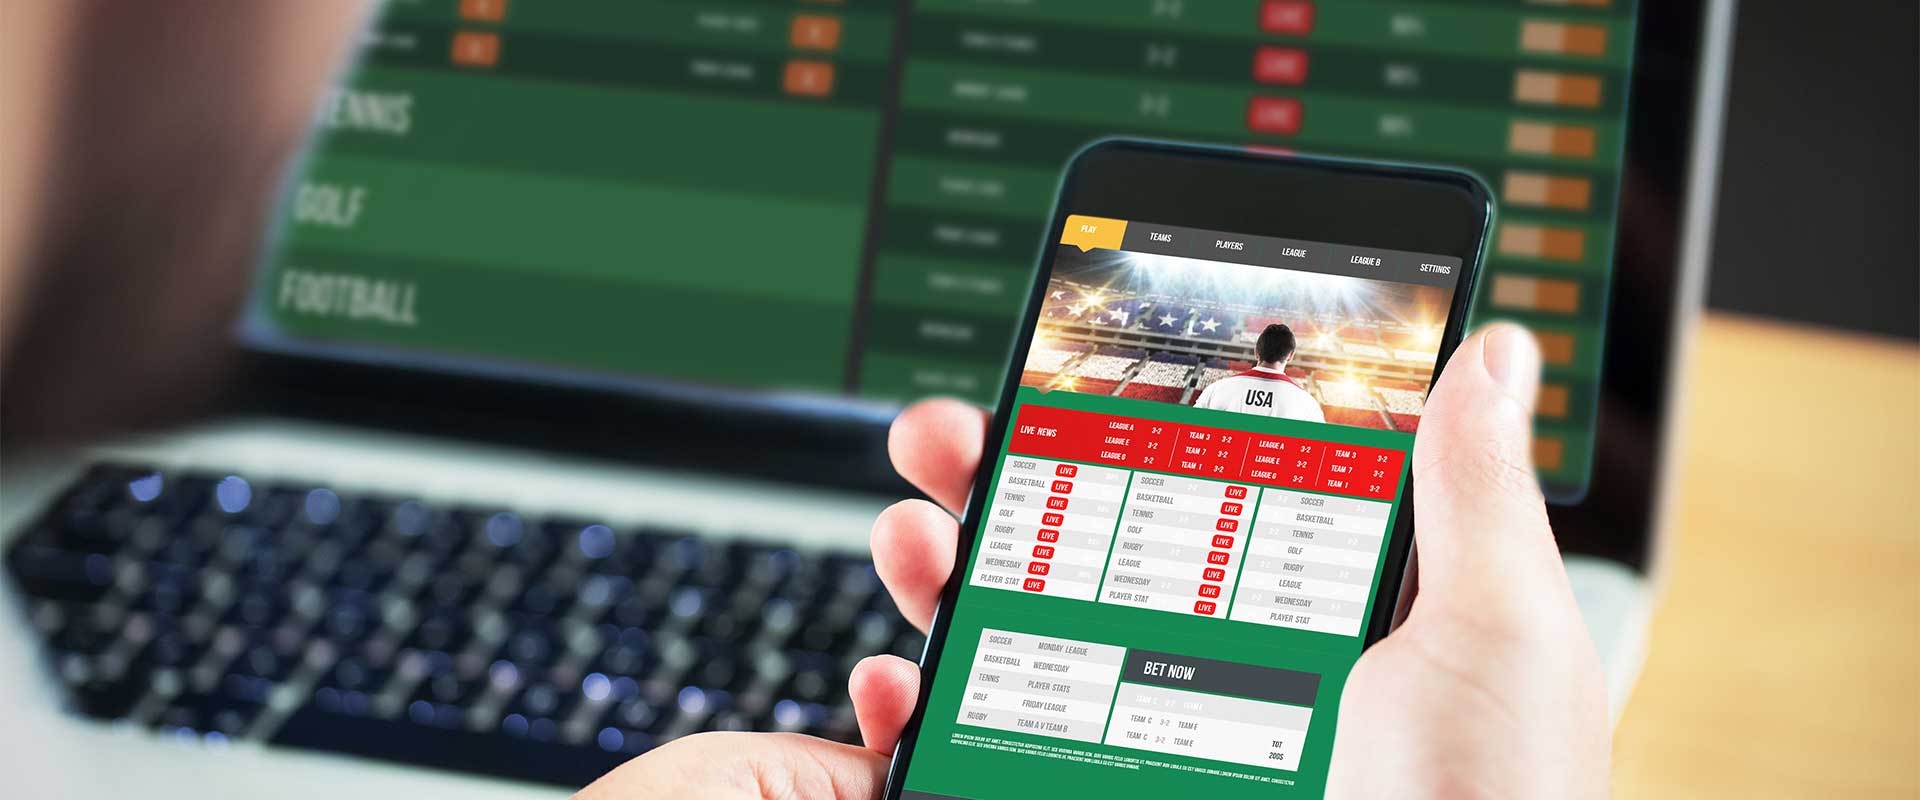 Enhancing Sports Betting With VPN Technology